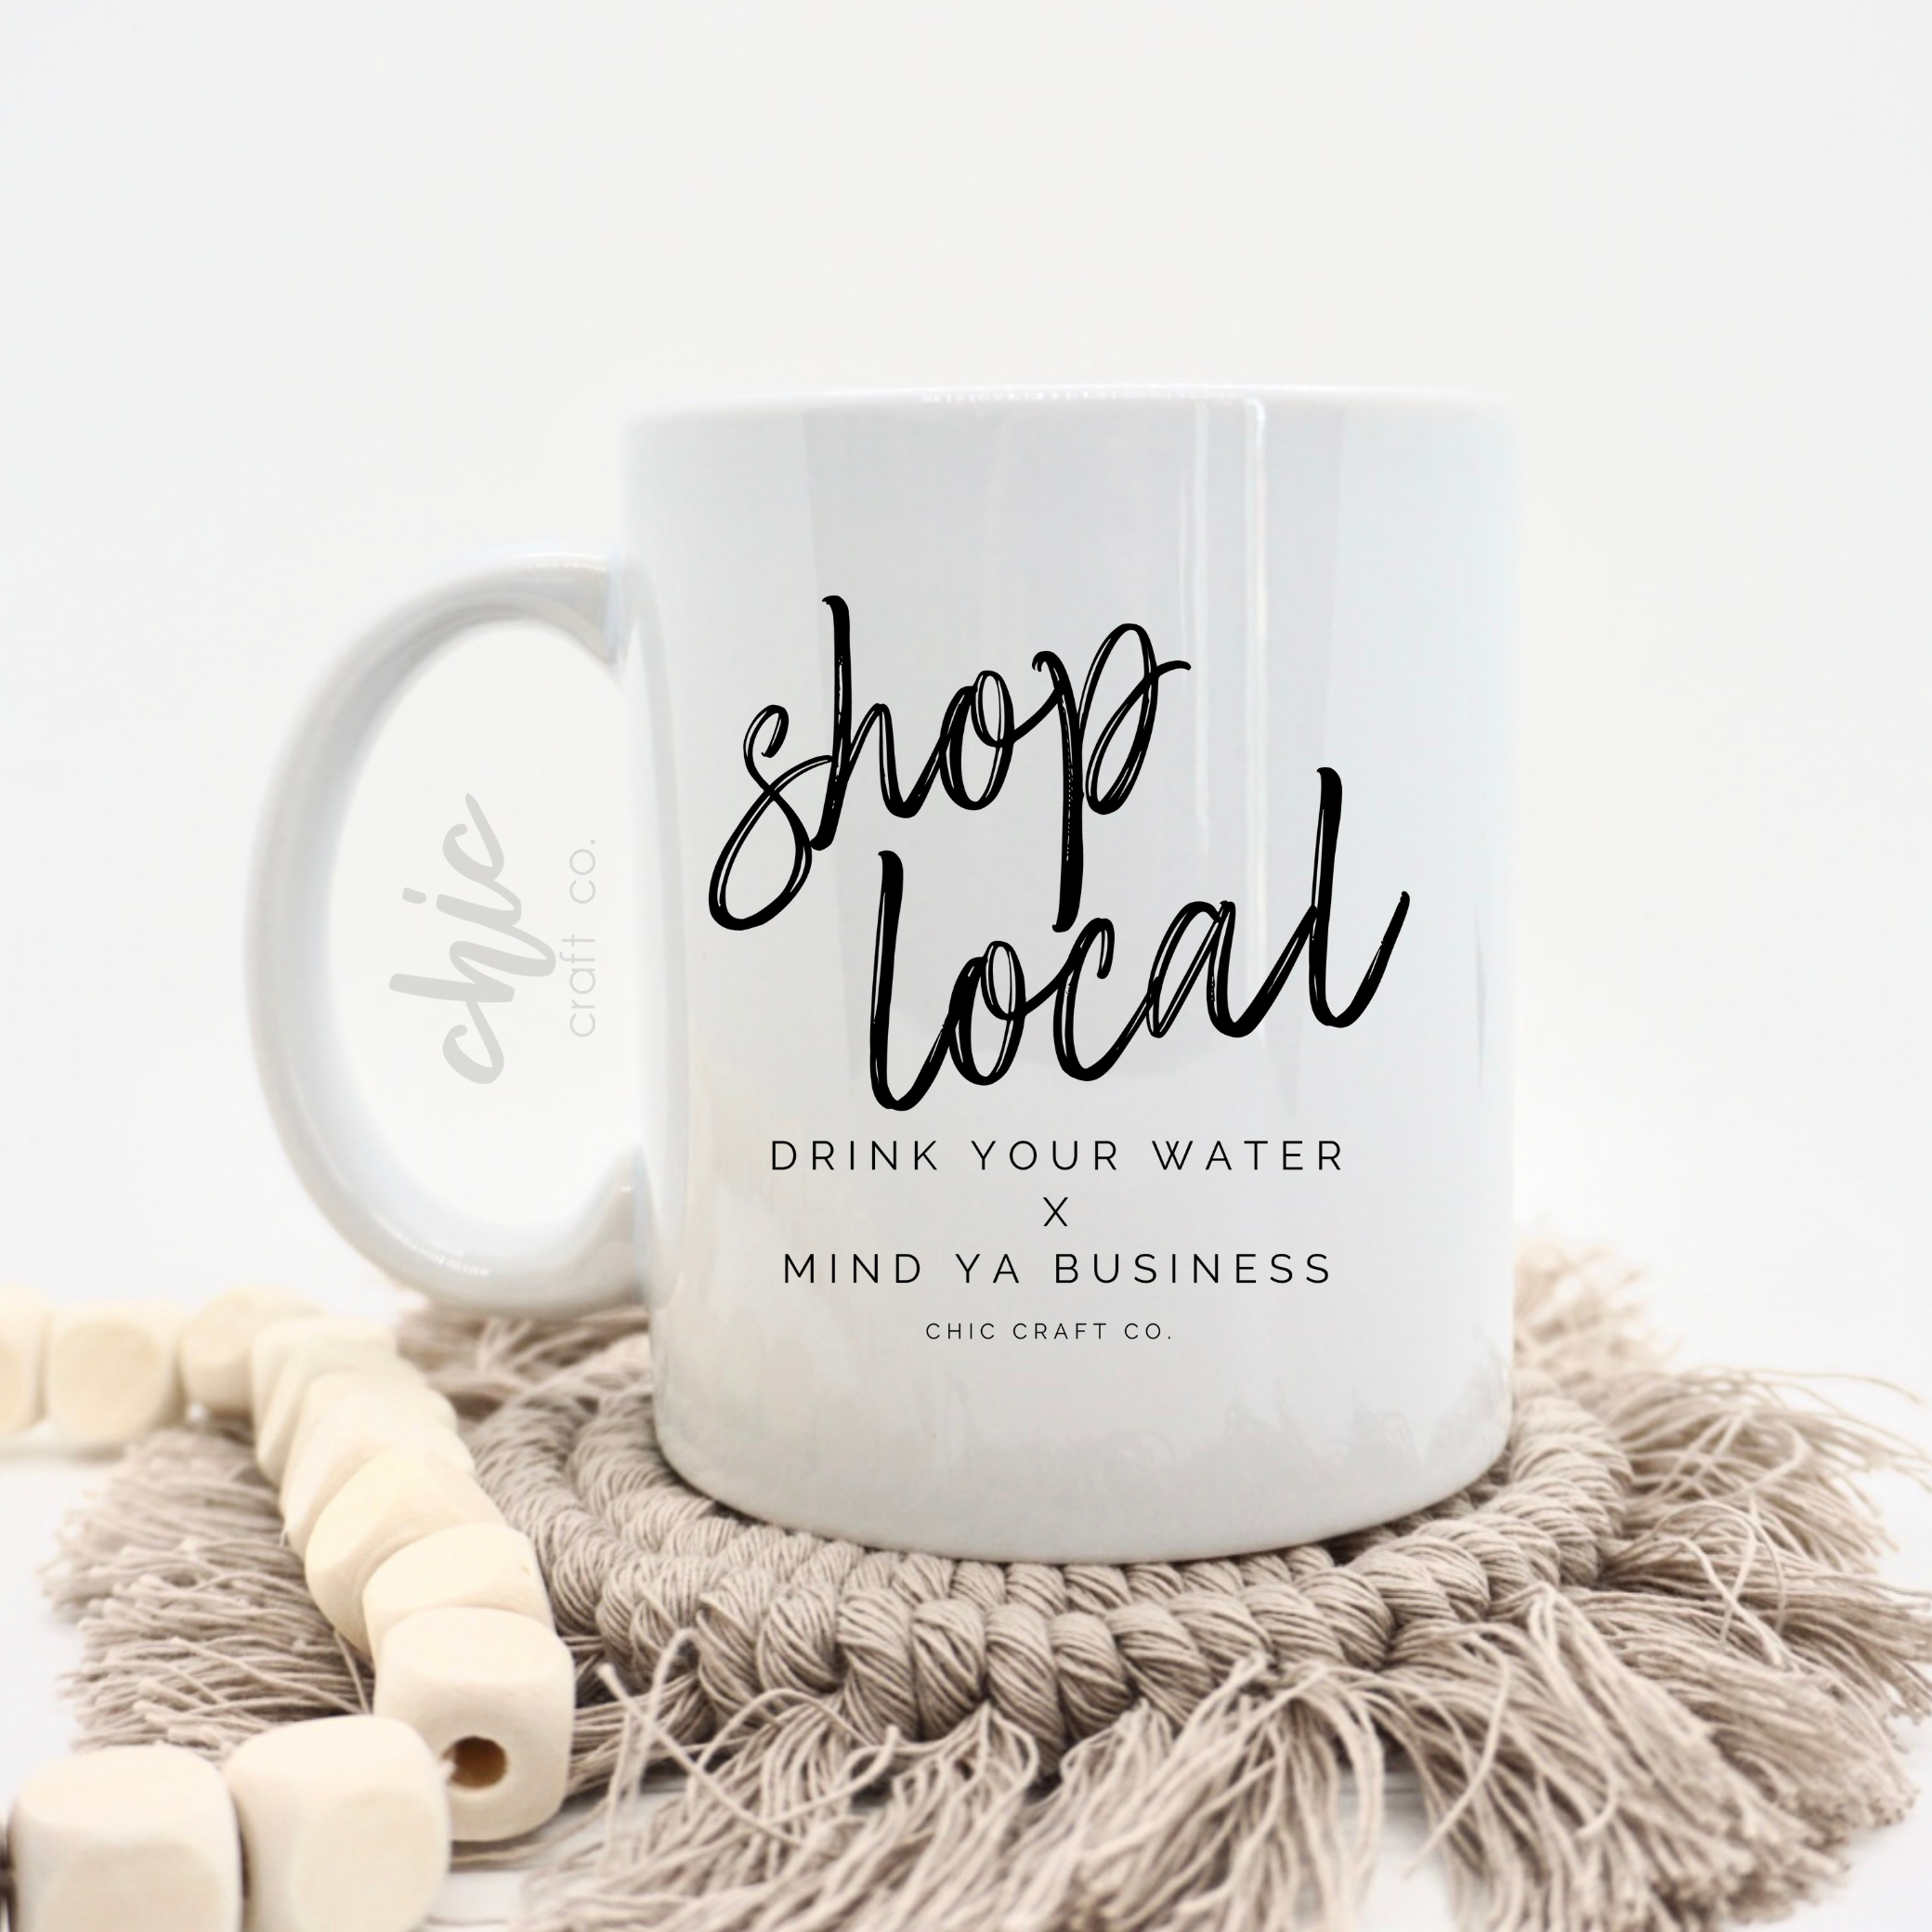 Shop Local, Drink Your Water, Mind Ya Business